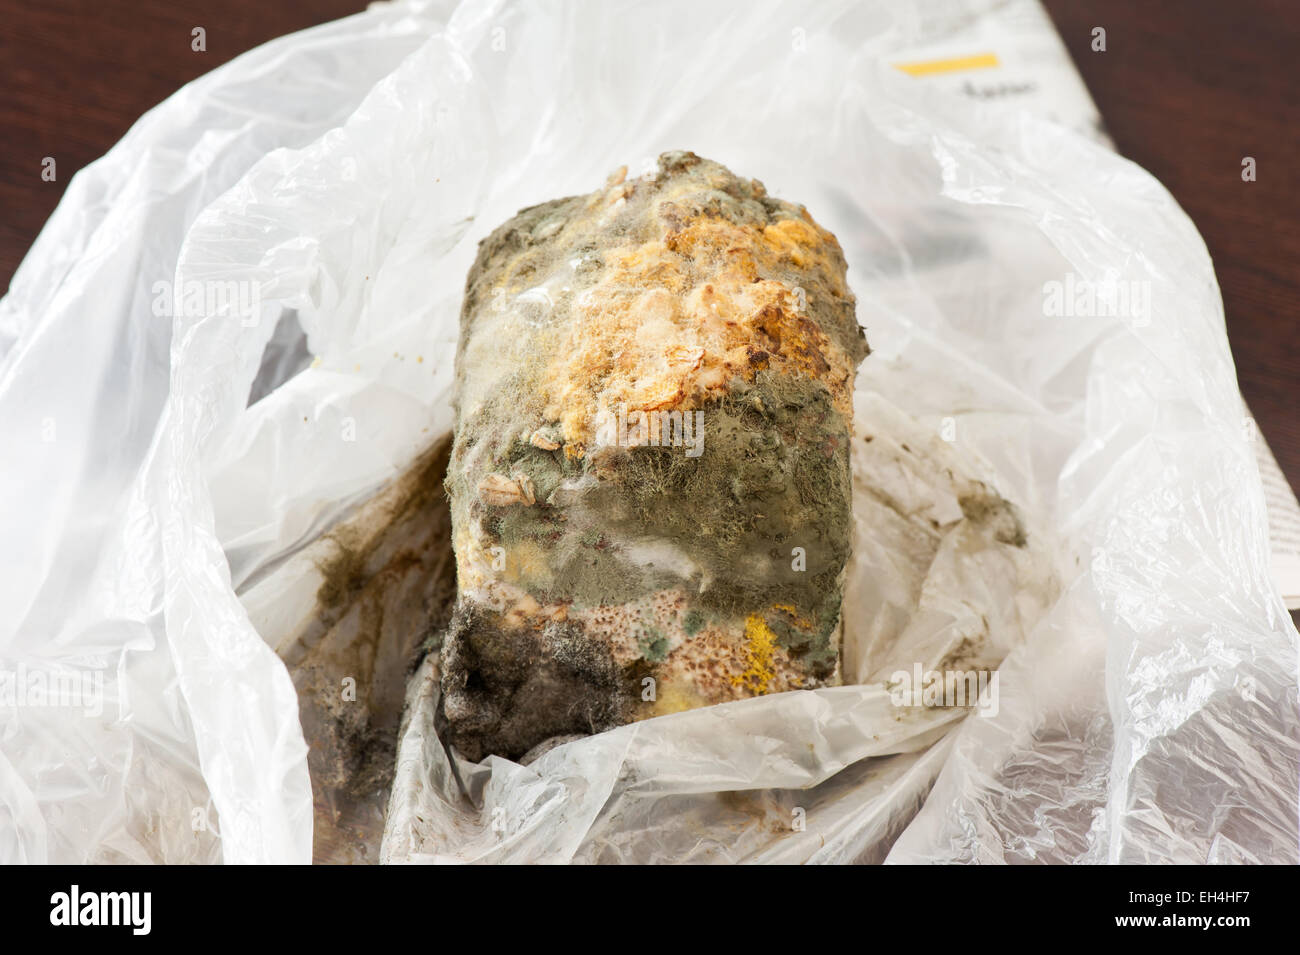 Mold on bread in plastic bag waste Stock Photo